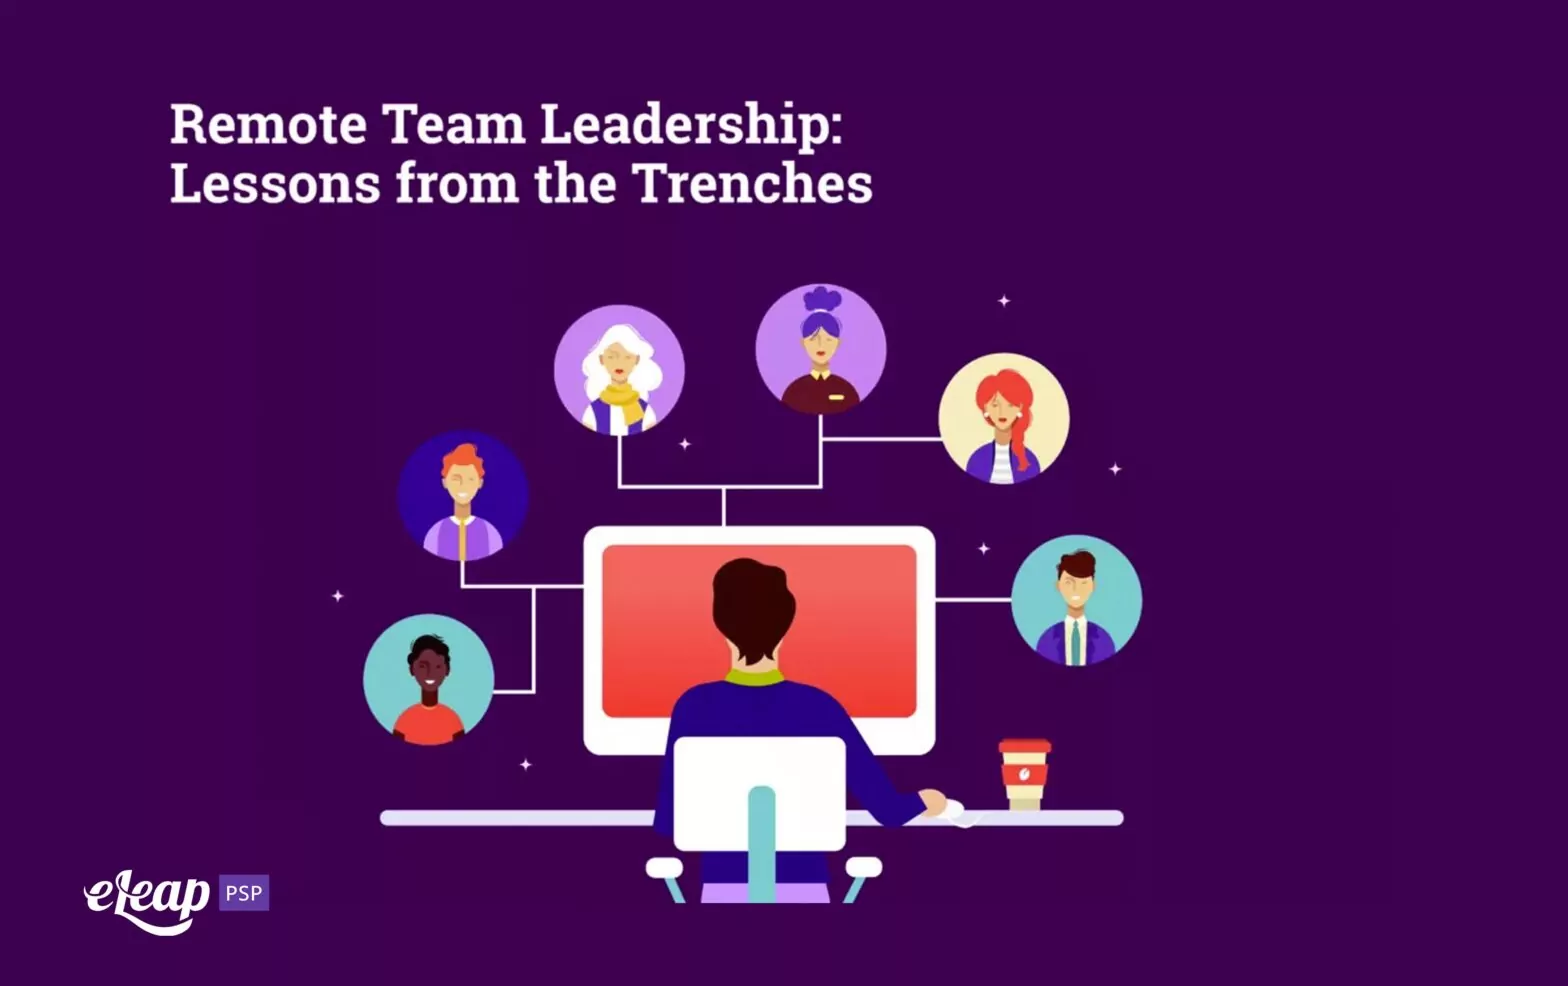 Remote Team Leadership: Lessons from the Trenches